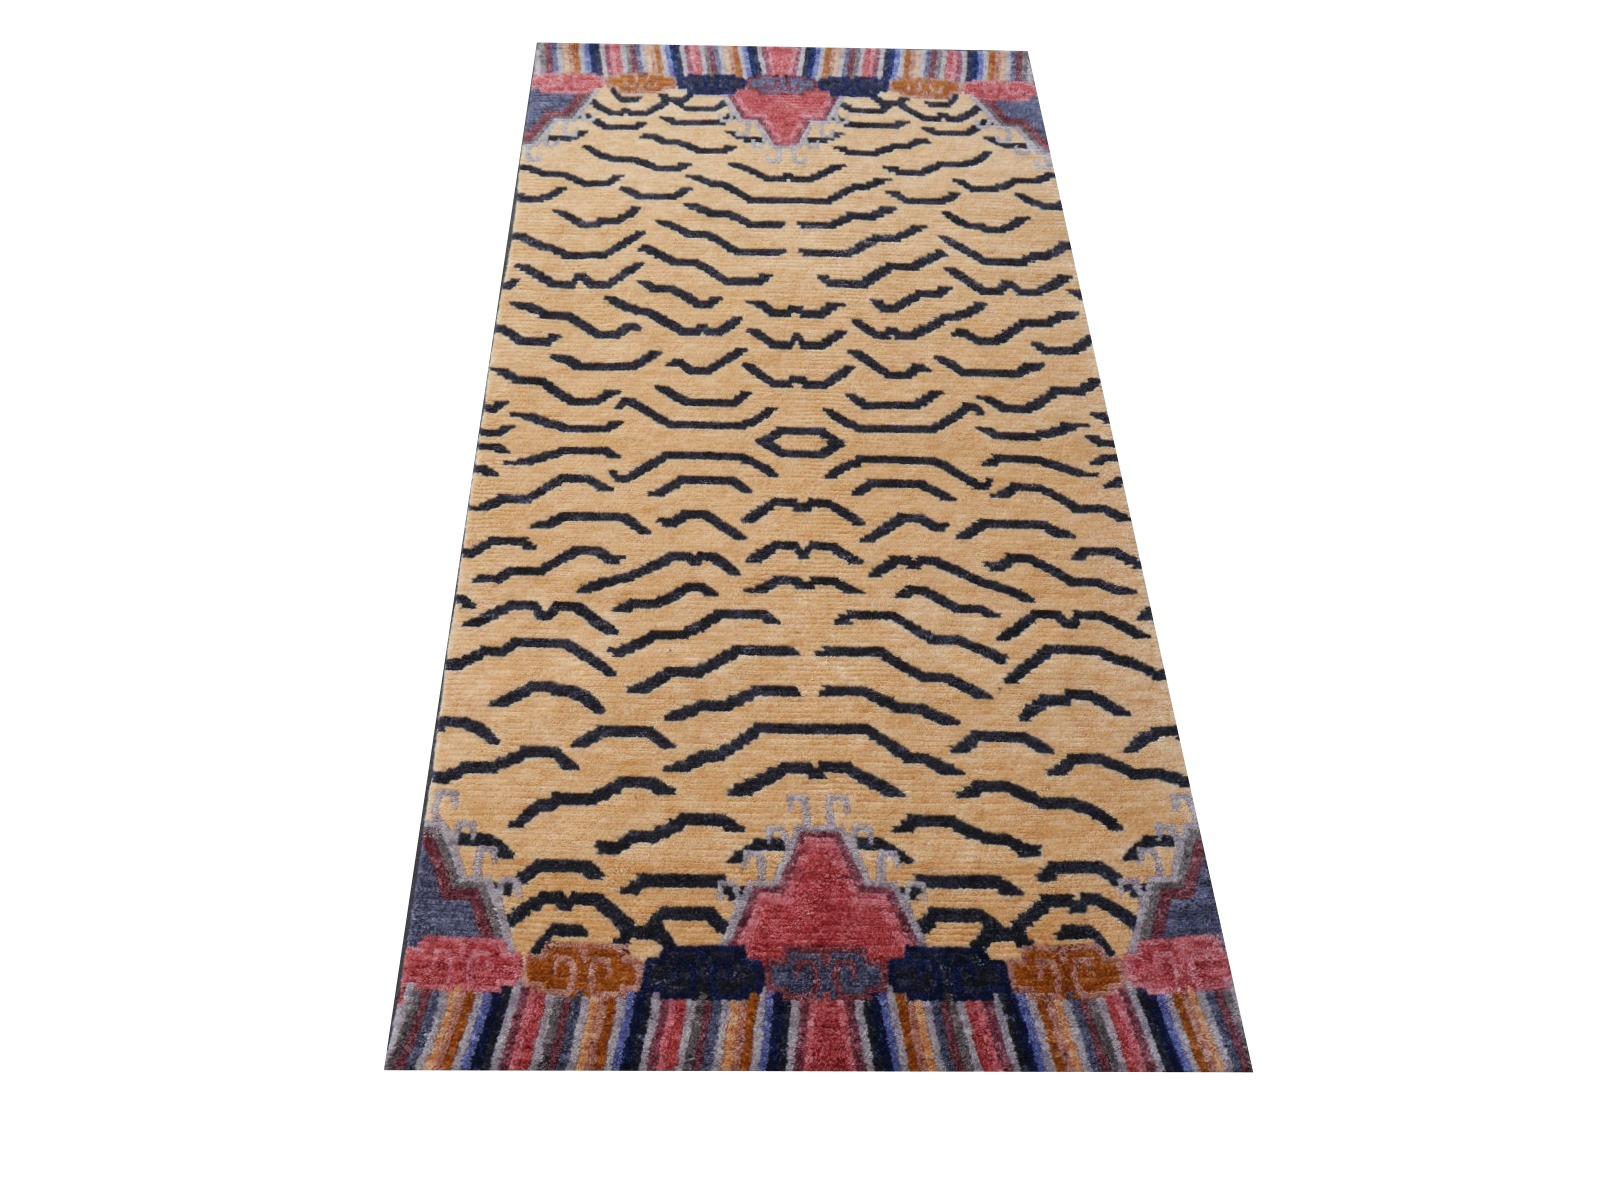 A Tibetan tiger rug, hand knotted in Nepal.

This traditional Tiger rug design is typically found on antique rugs called Khaden. It describes a small sized rug of about 3 x 6 ft that was used in Tibet to decorate columns or seat pad. Often these